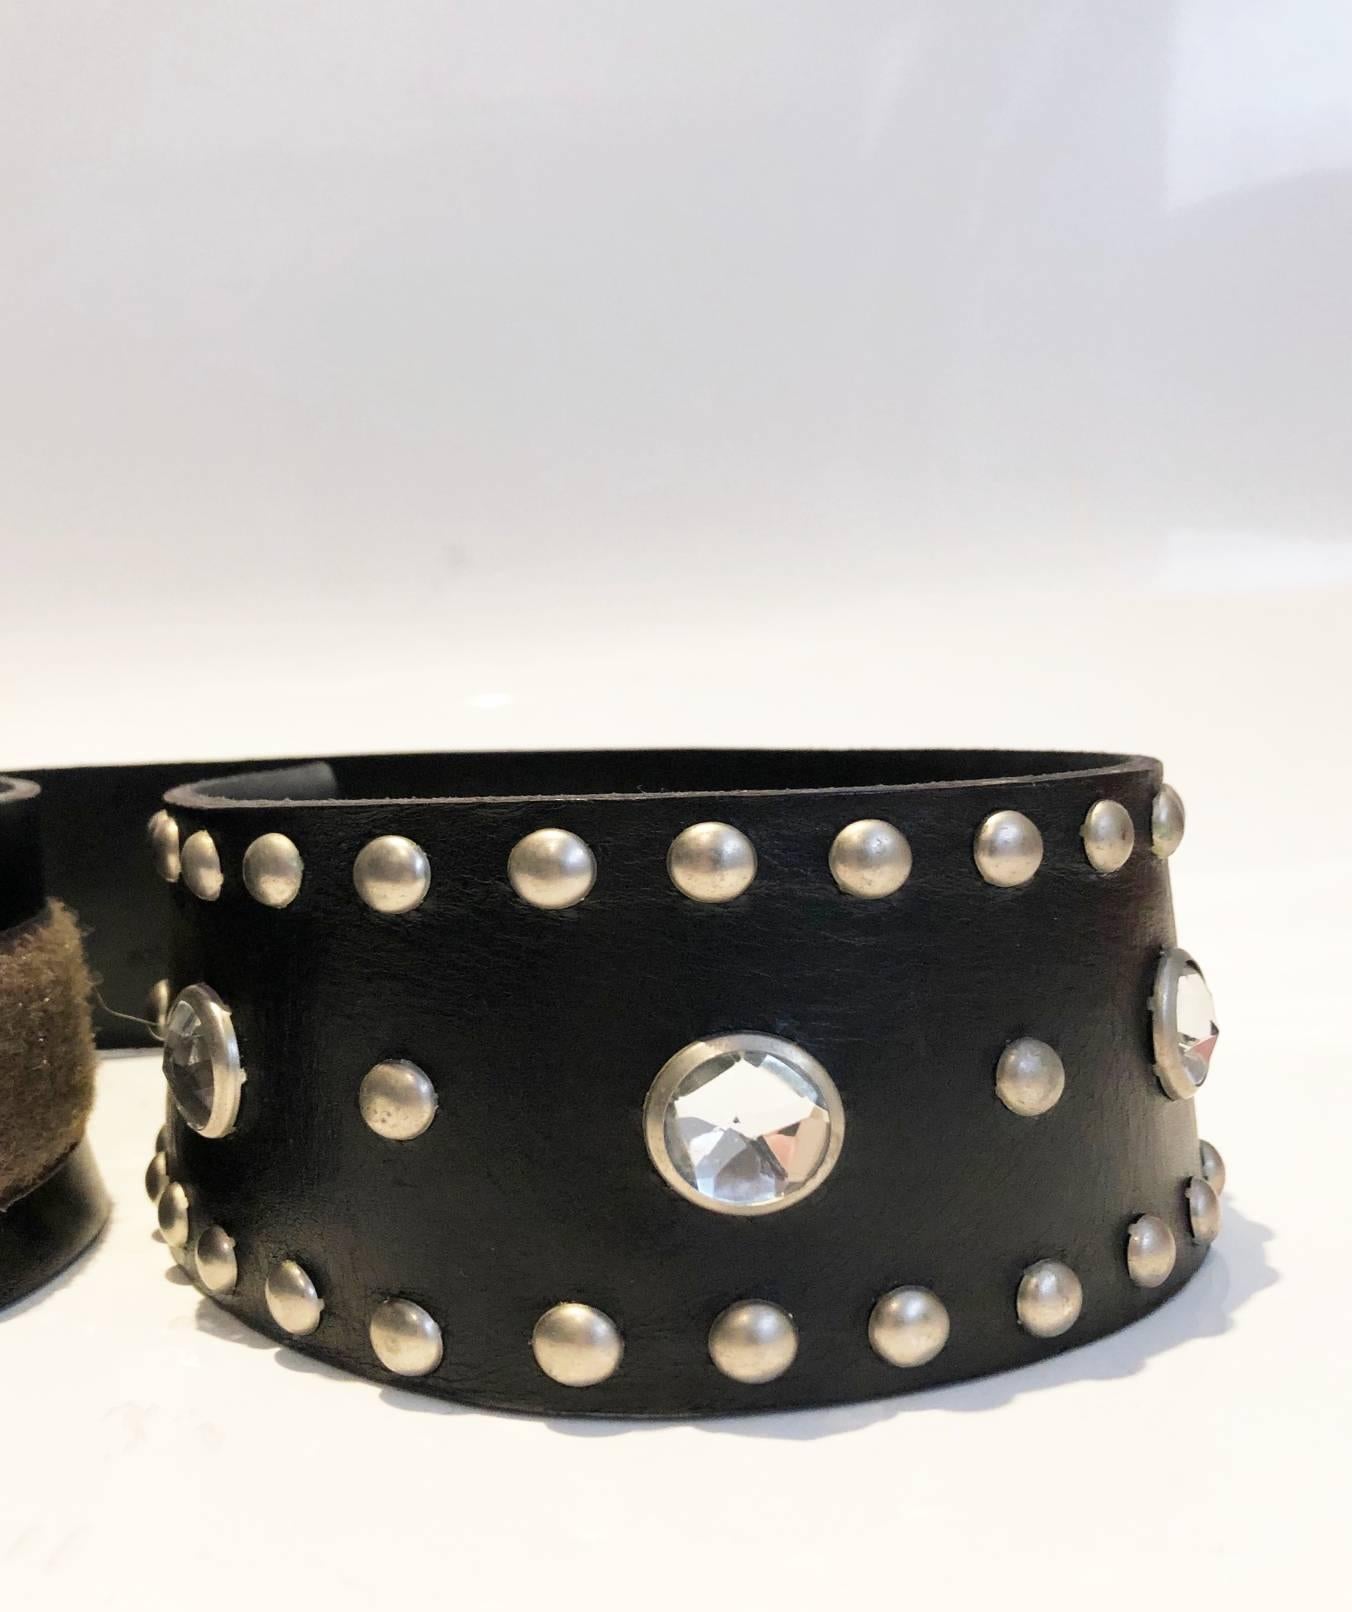 Dolce & Gabbana leather belt featuring crystal alike stones all around, Velcro strap closure,
Made in Italy
Length: 98cm x 8 cm height
Dolce Gabbana hologram
It comes with its original box
In excellent pre owned condition